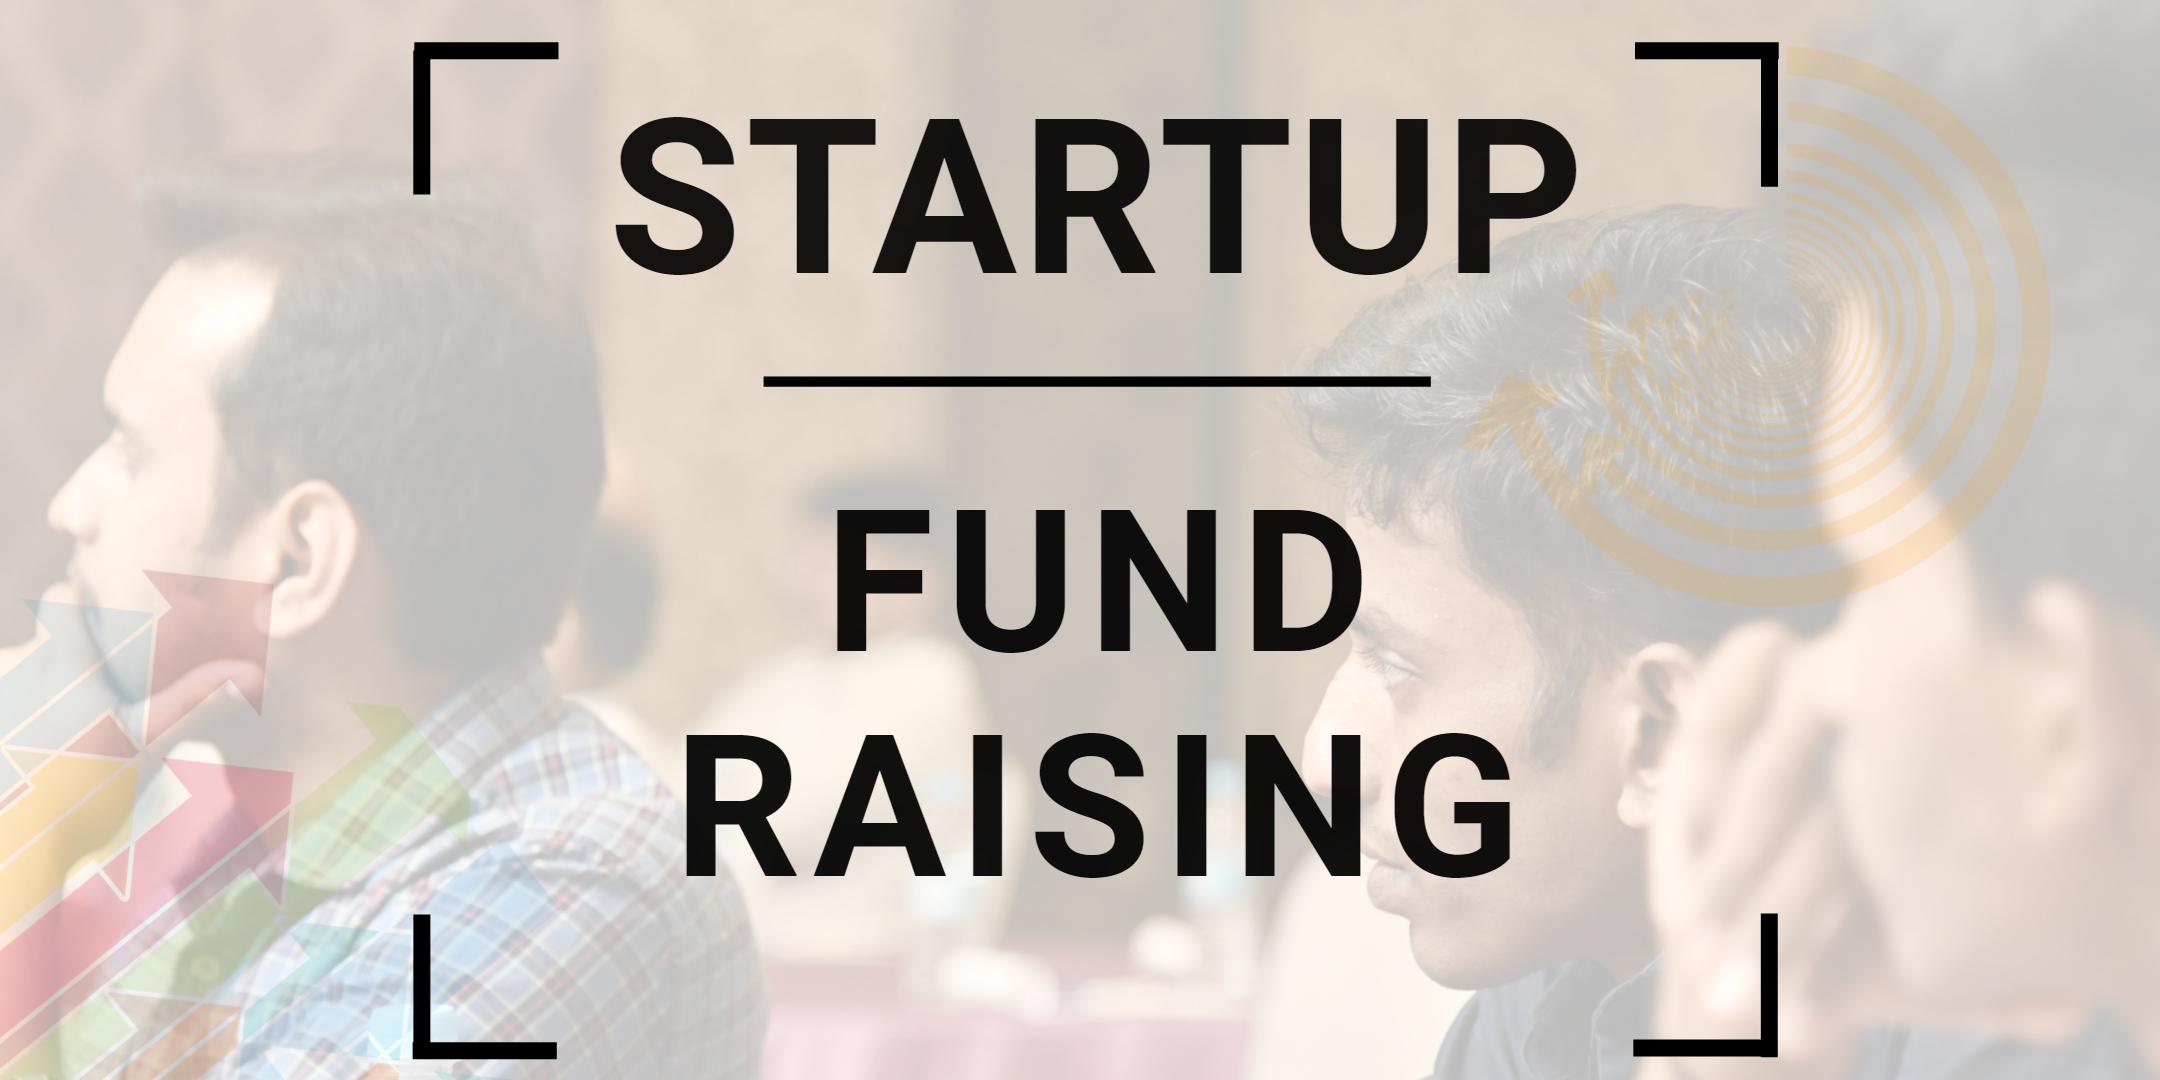 How to Raise Funds for Startup Business